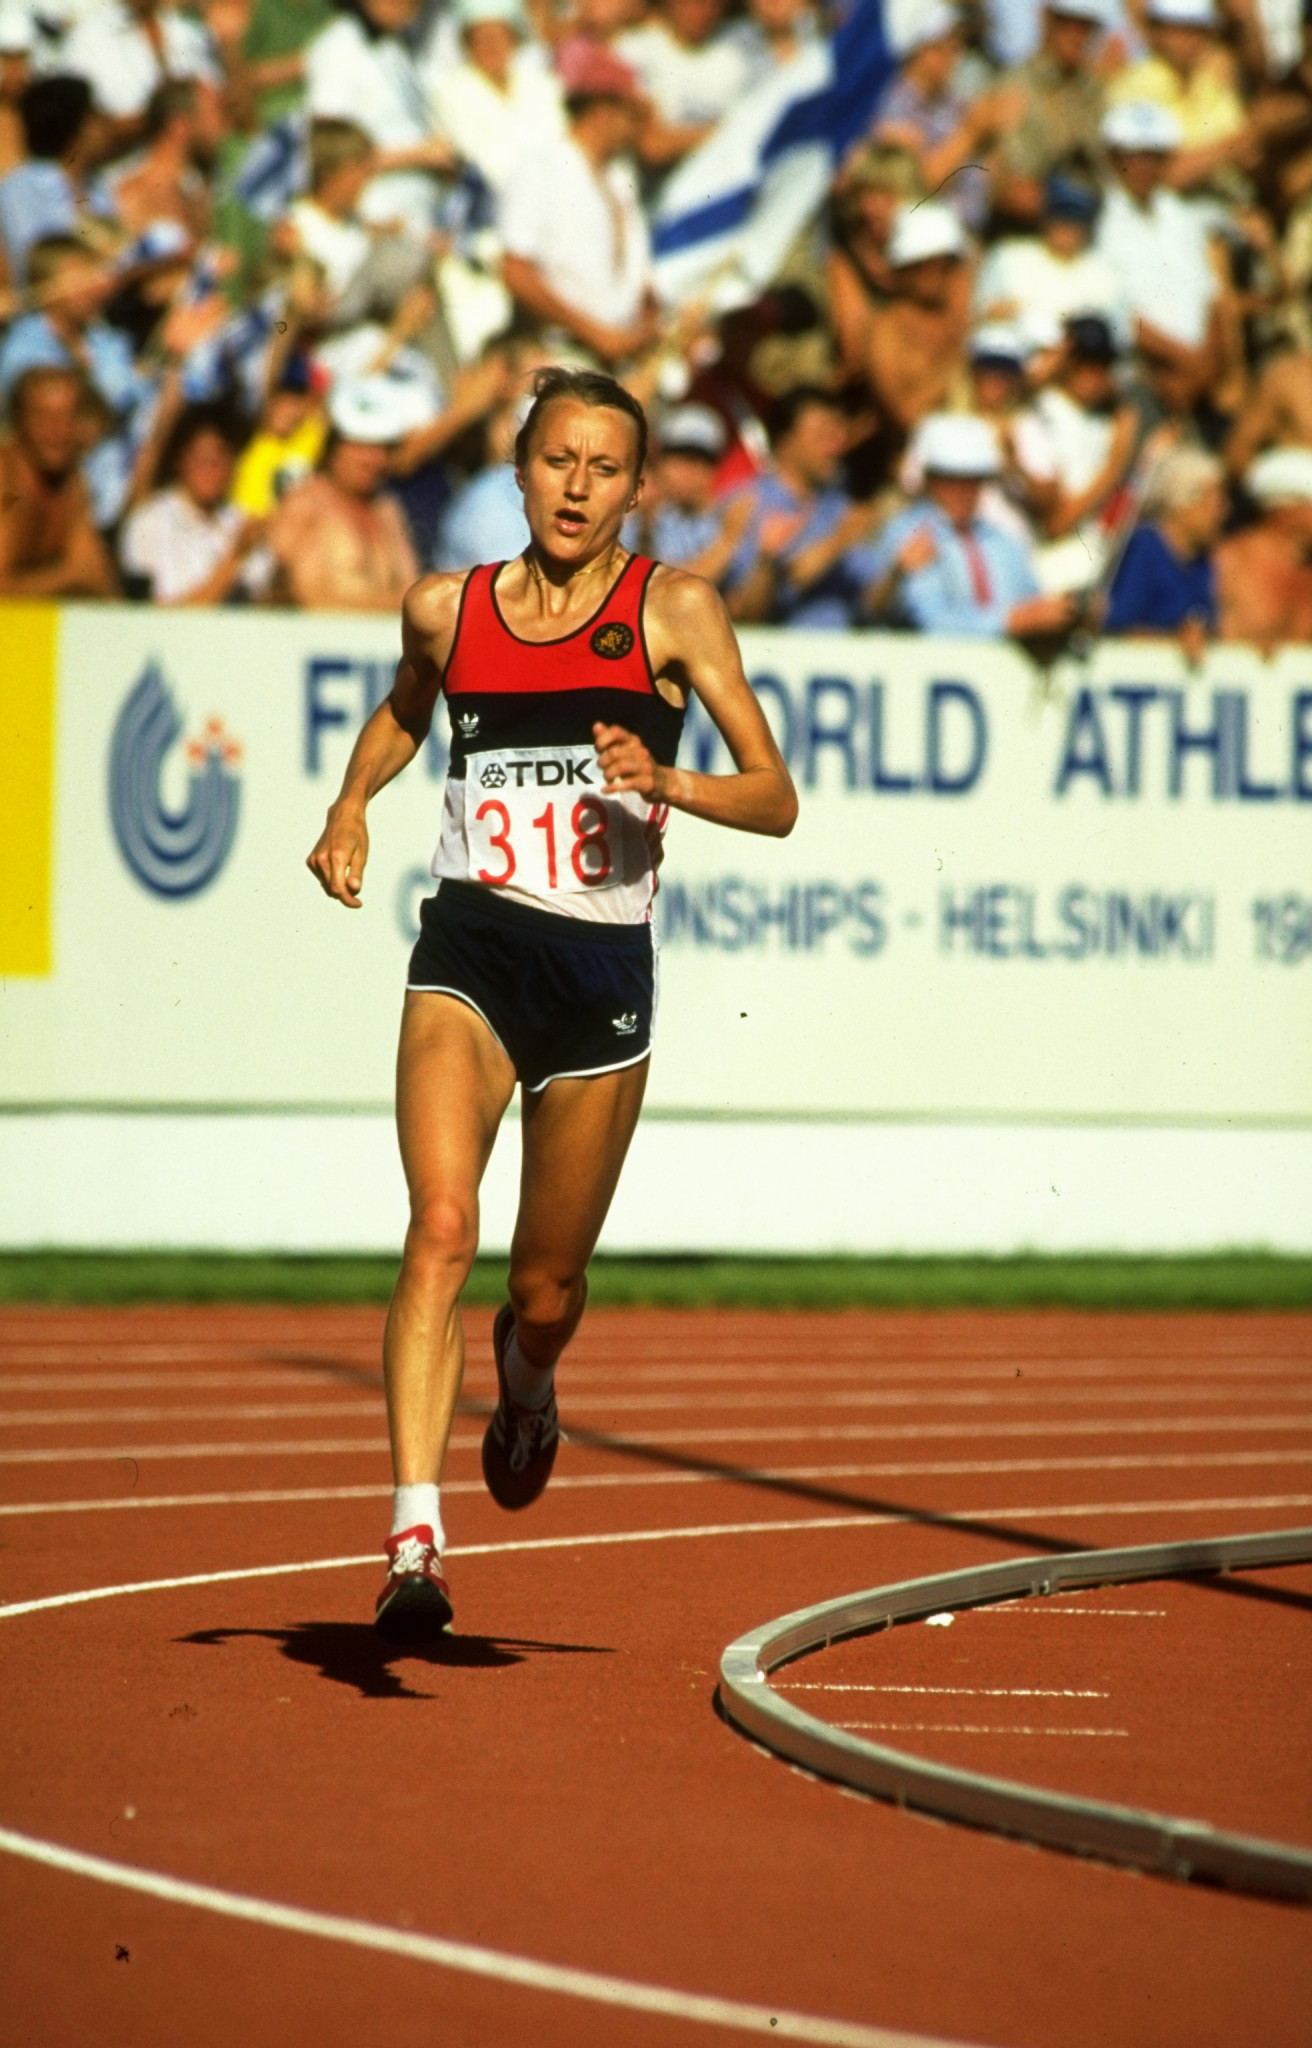 Norway's Grete Waitz made history at the 1983 World Championships when she won the marathon, the first time women had bee allowed to compete over the distance at a major global event ©Getty Images